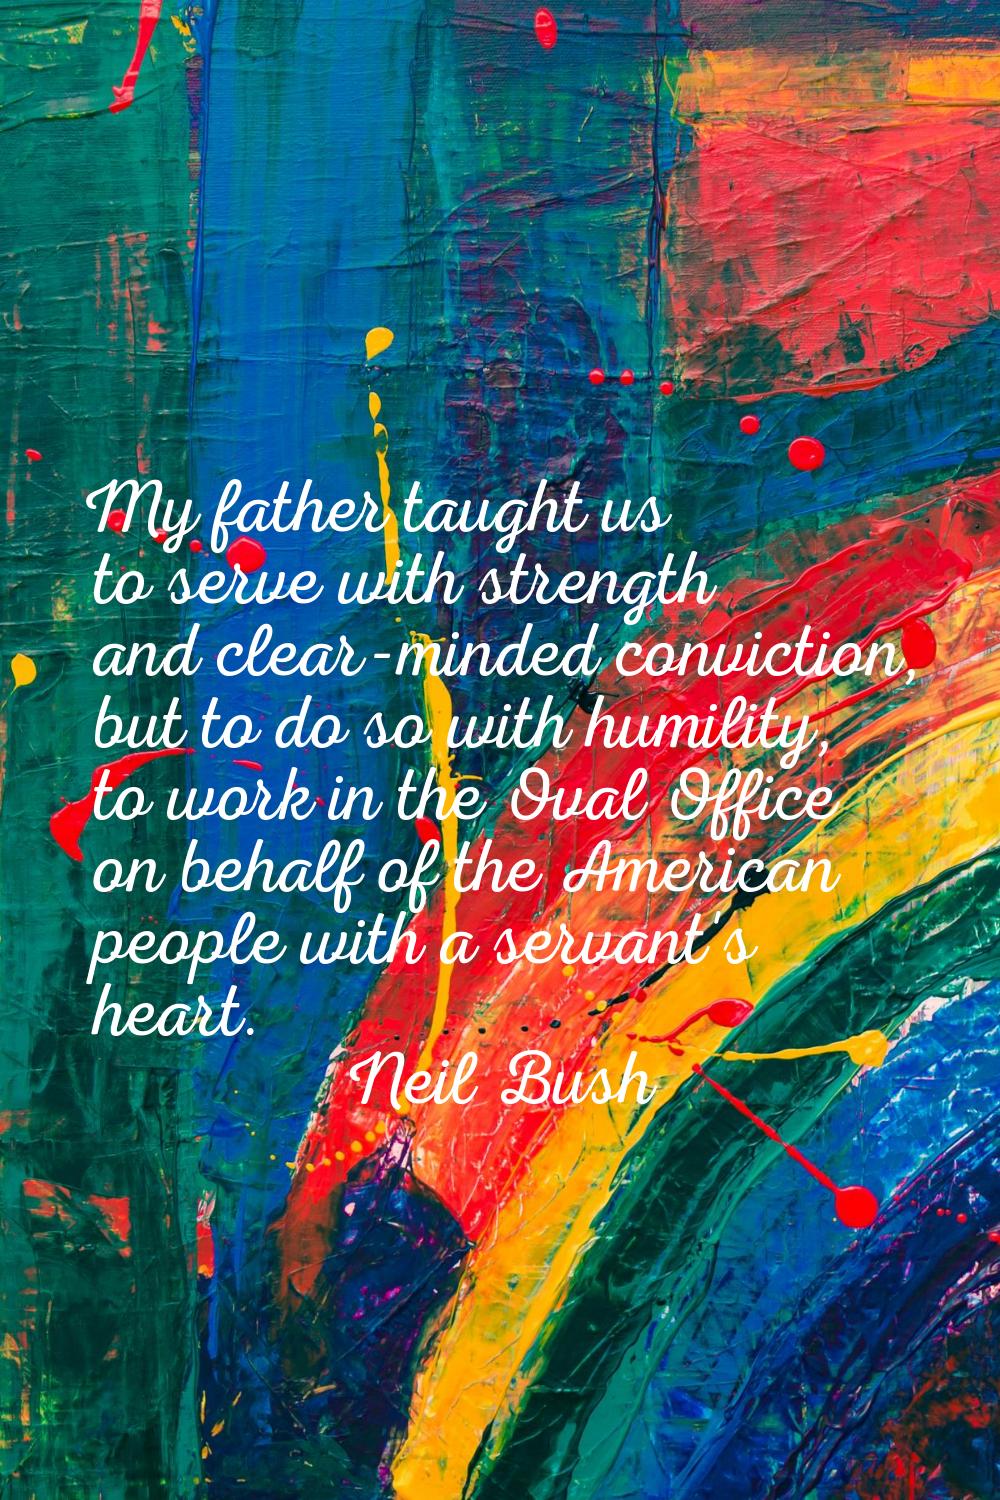 My father taught us to serve with strength and clear-minded conviction, but to do so with humility,